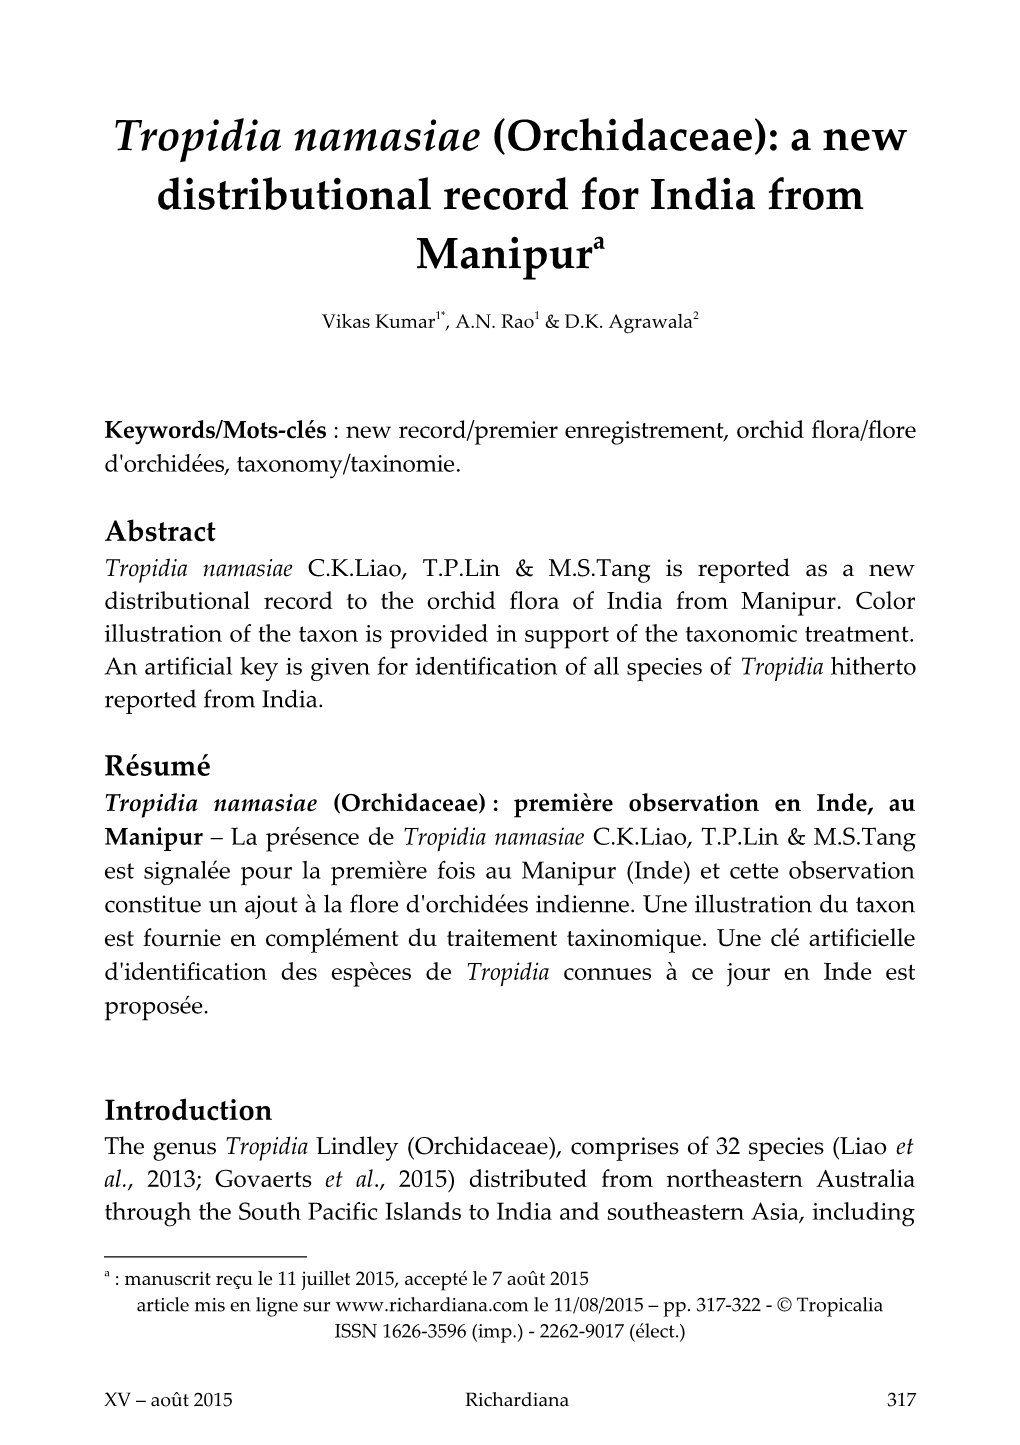 Tropidia Namasiae (Orchidaceae): a New Distributional Record for India from Manipura